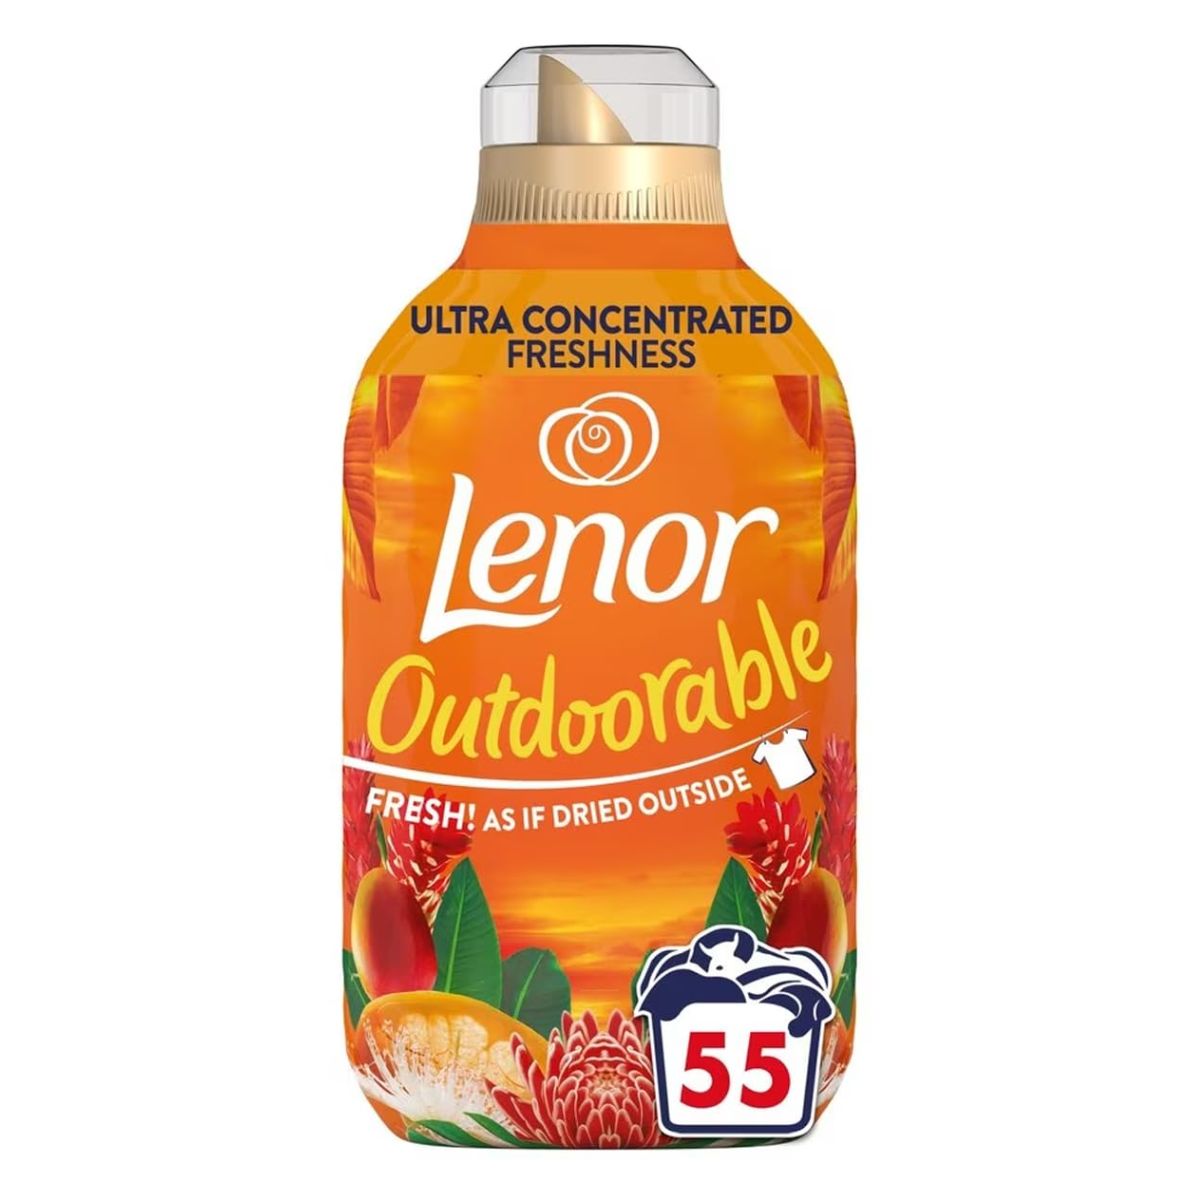 A bottle of Lenor - Outdoorable Fabric Conditioner - 770ml on a white background.